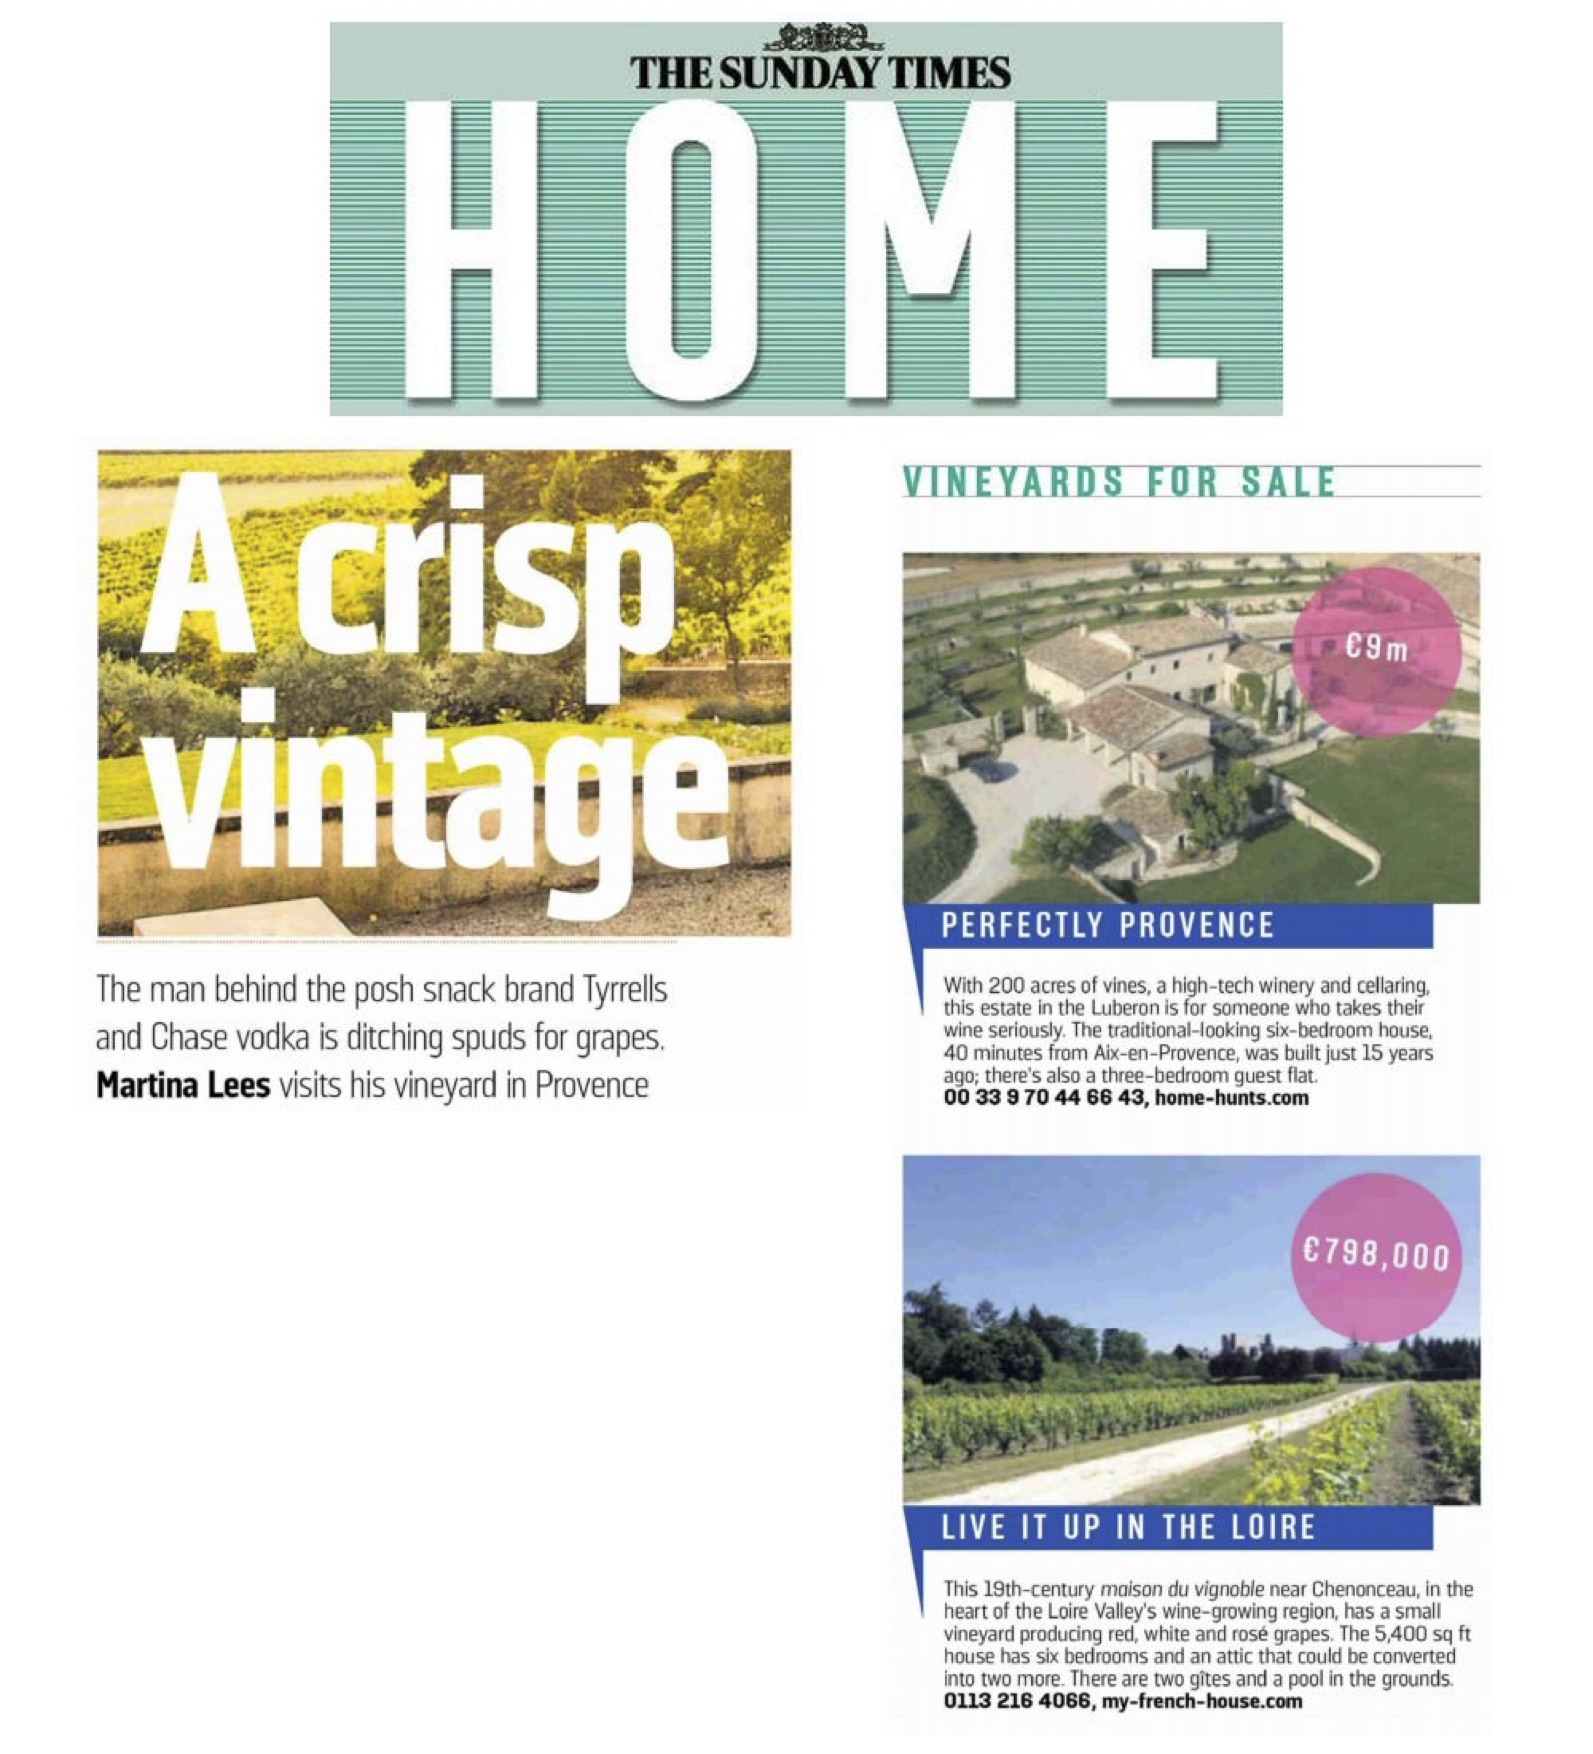 Sunday Times – French Vineyards for sale